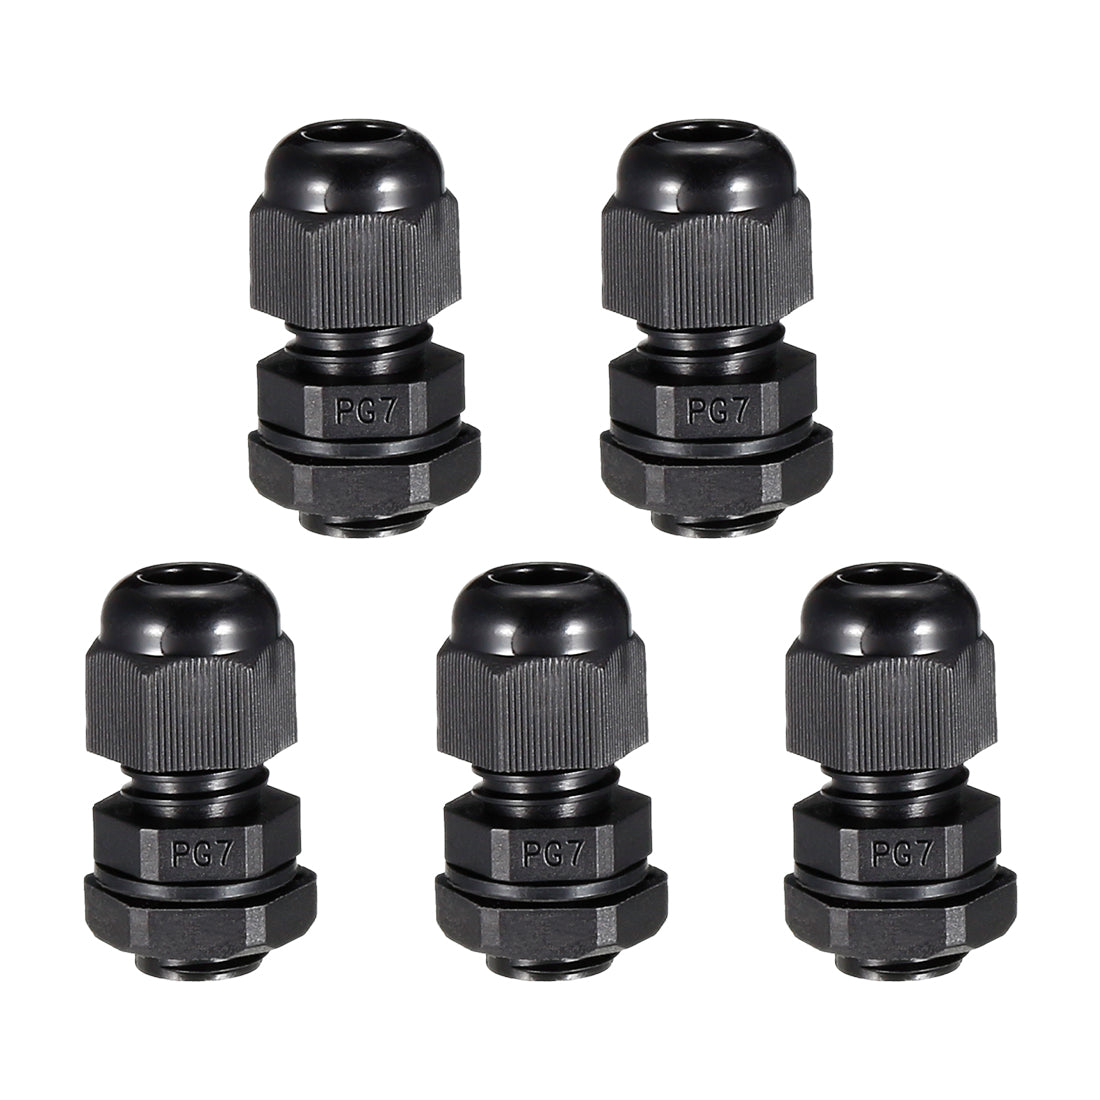 uxcell Uxcell 5Pcs PG7 Cable Gland Waterproof Plastic Joint Adjustable Locknut Black for 4mm-6.5mm Dia Cable Wire